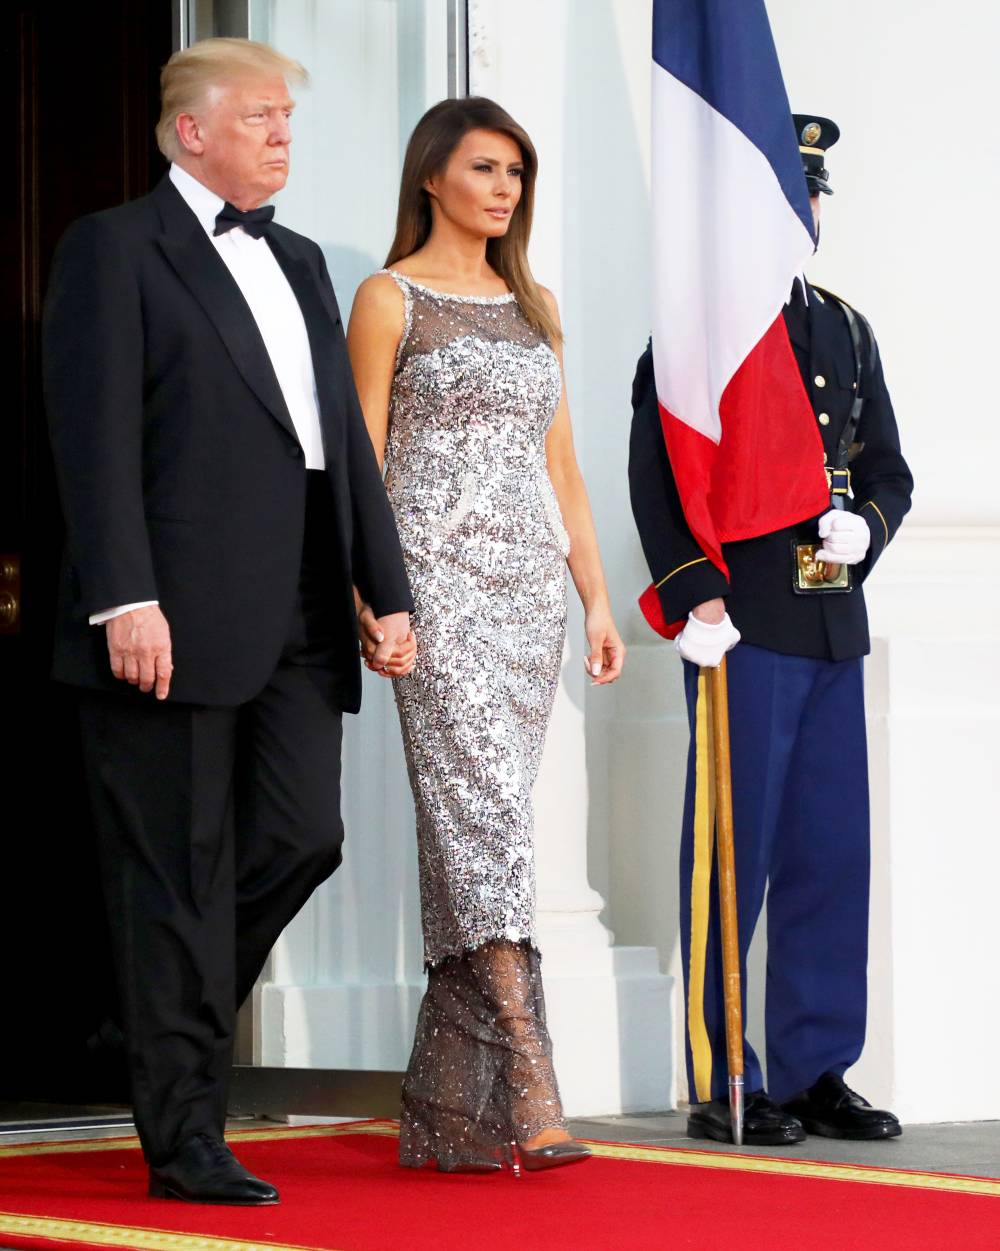 Donald Trump and Melania Trump arrive to welcome French President Emmanuel Macron and his wife, Brigitte Macron for a State Dinner at the North Portico of the White House in Washington, DC April 24, 2018.